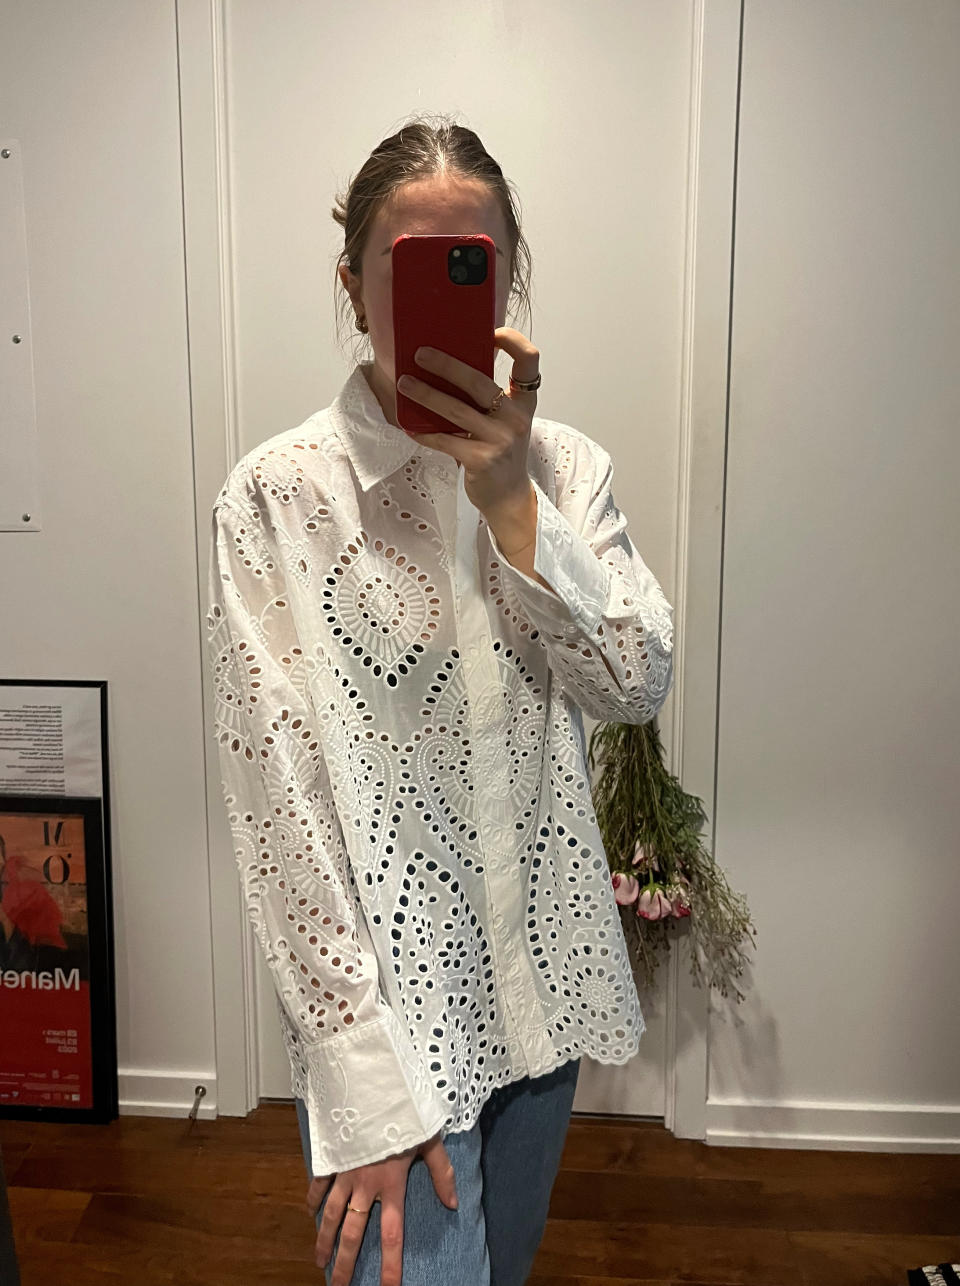 woman taking mirror selfie in white eyelet lace top and blue jeans